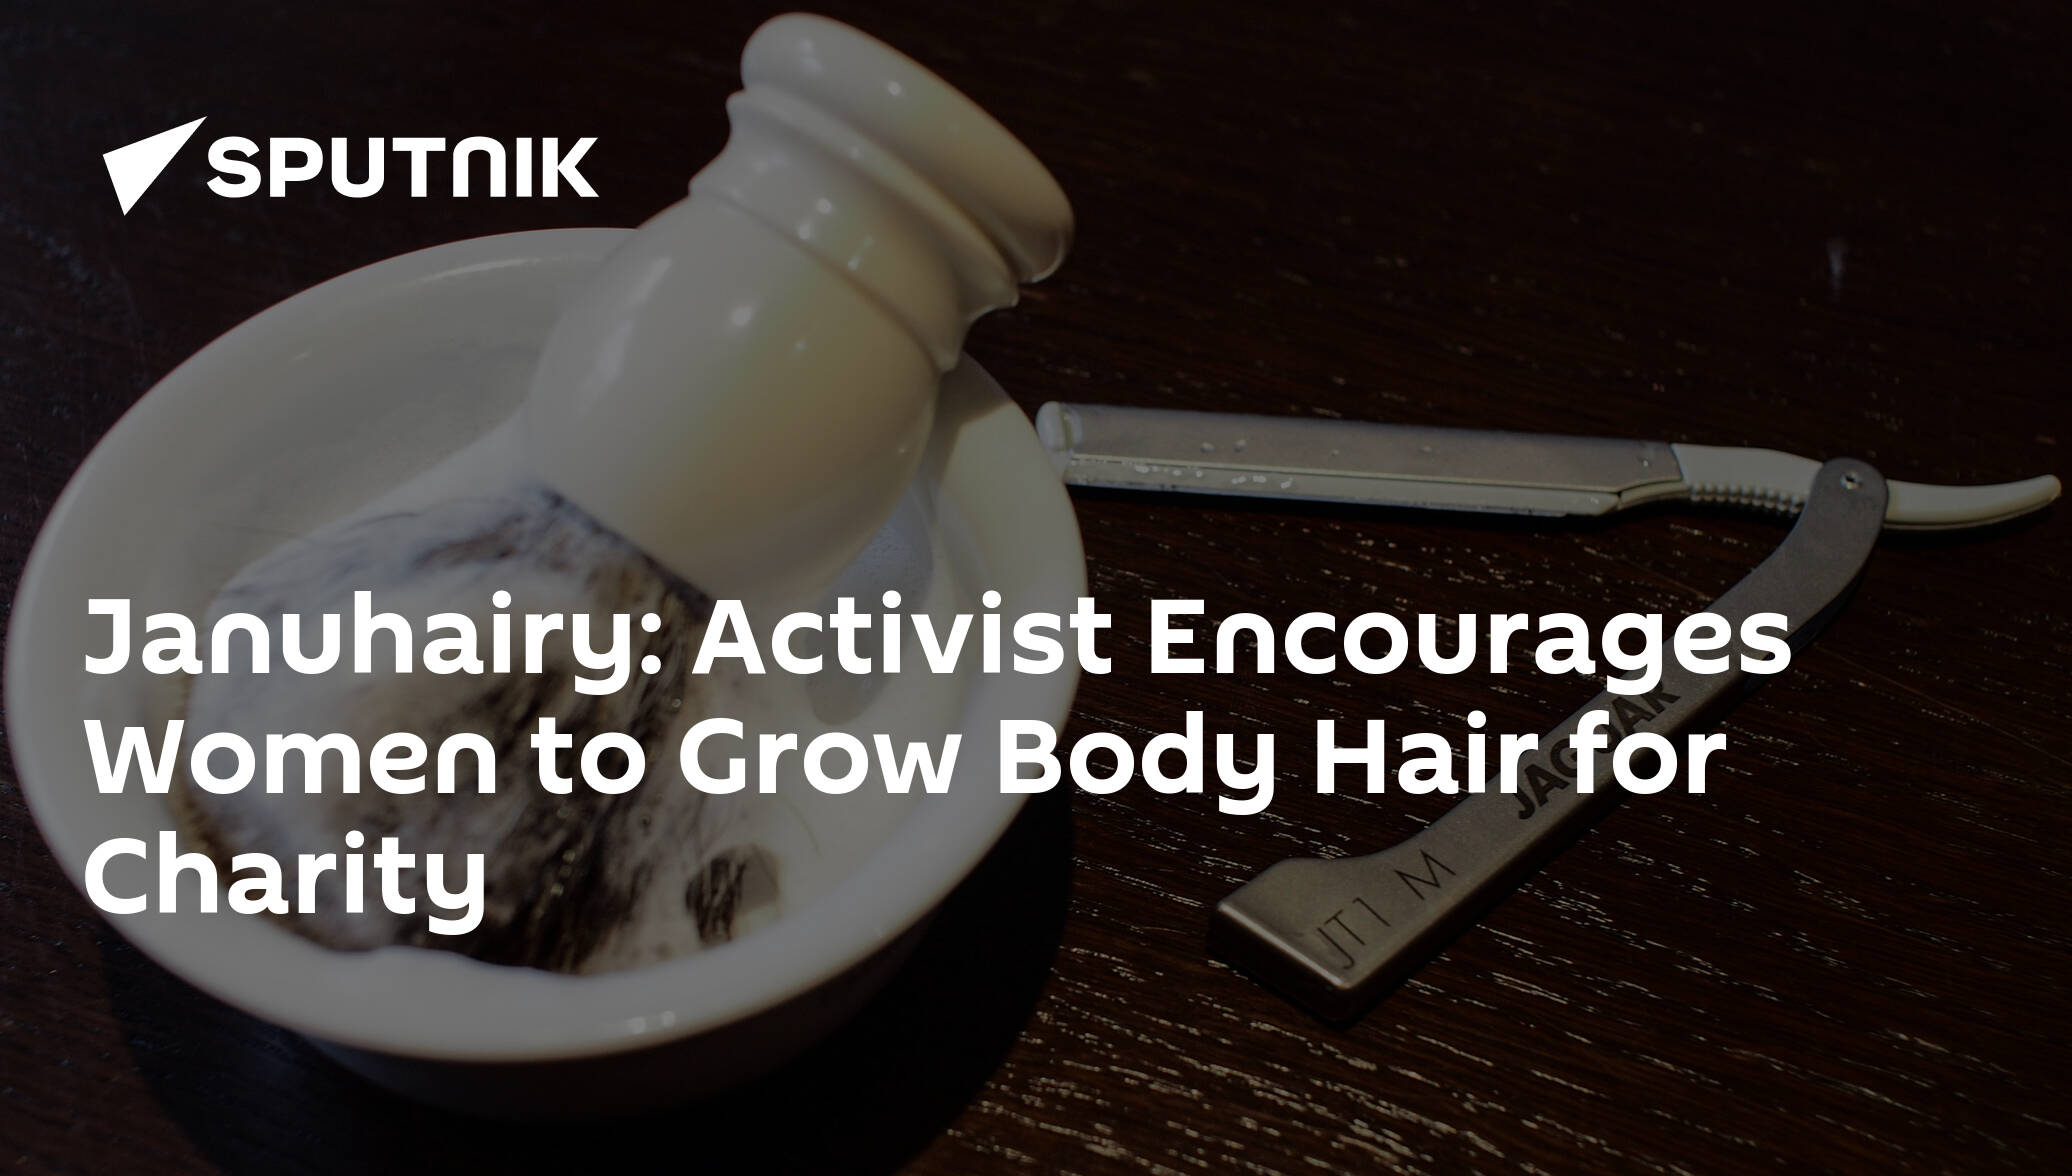 Januhairy Activist Encourages Women To Grow Body Hair For Charity 05 01 2019 Sputnik